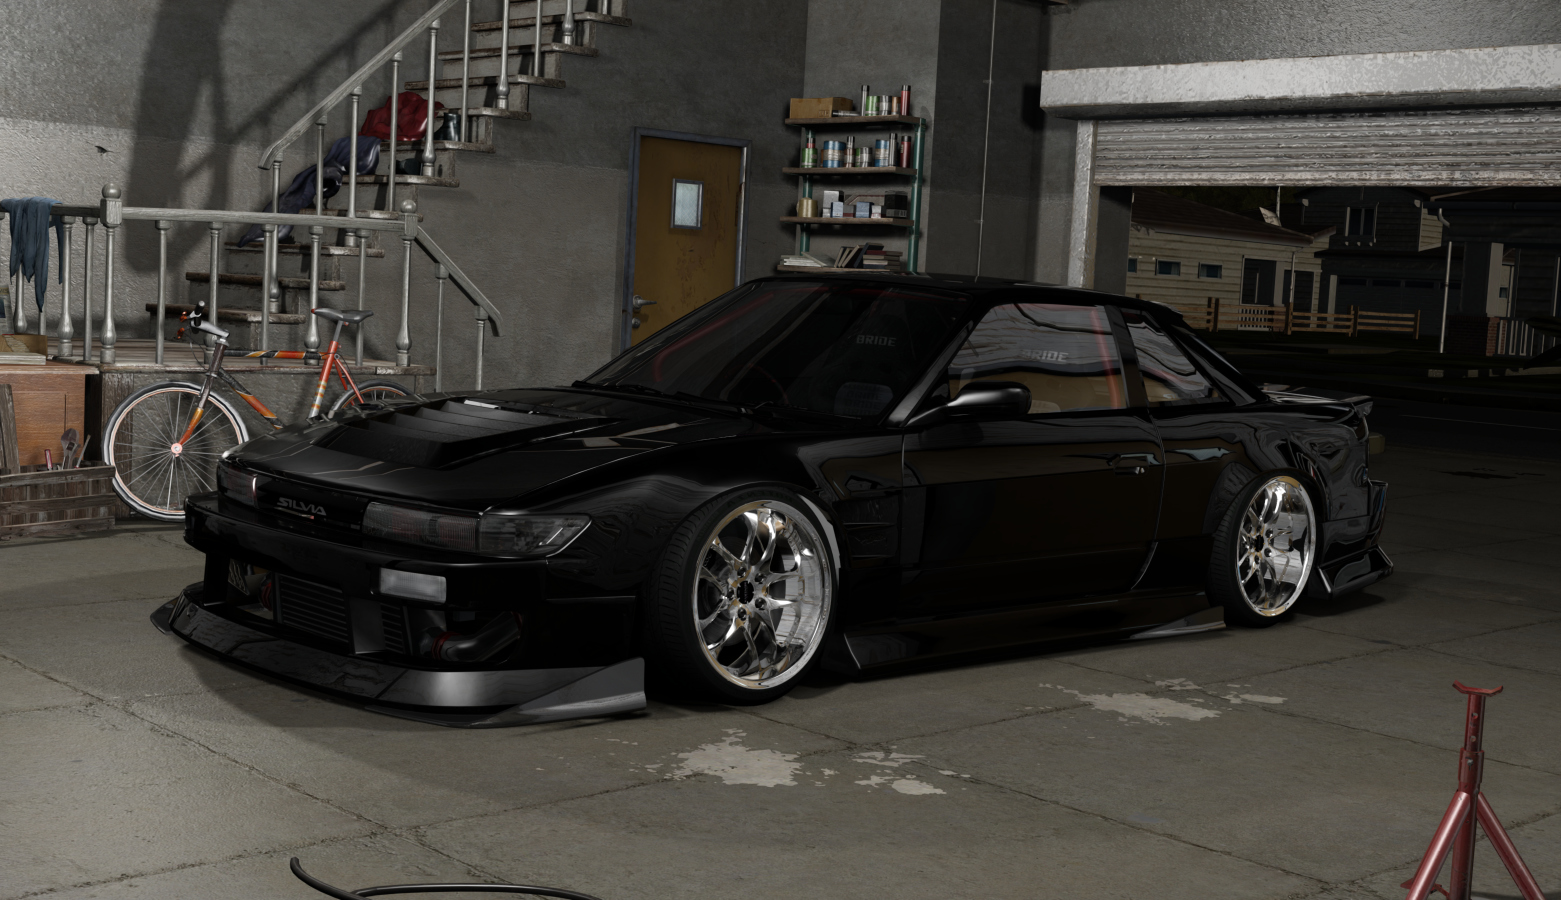 DWG Nissan Silvia S13 Street Style Preview Image